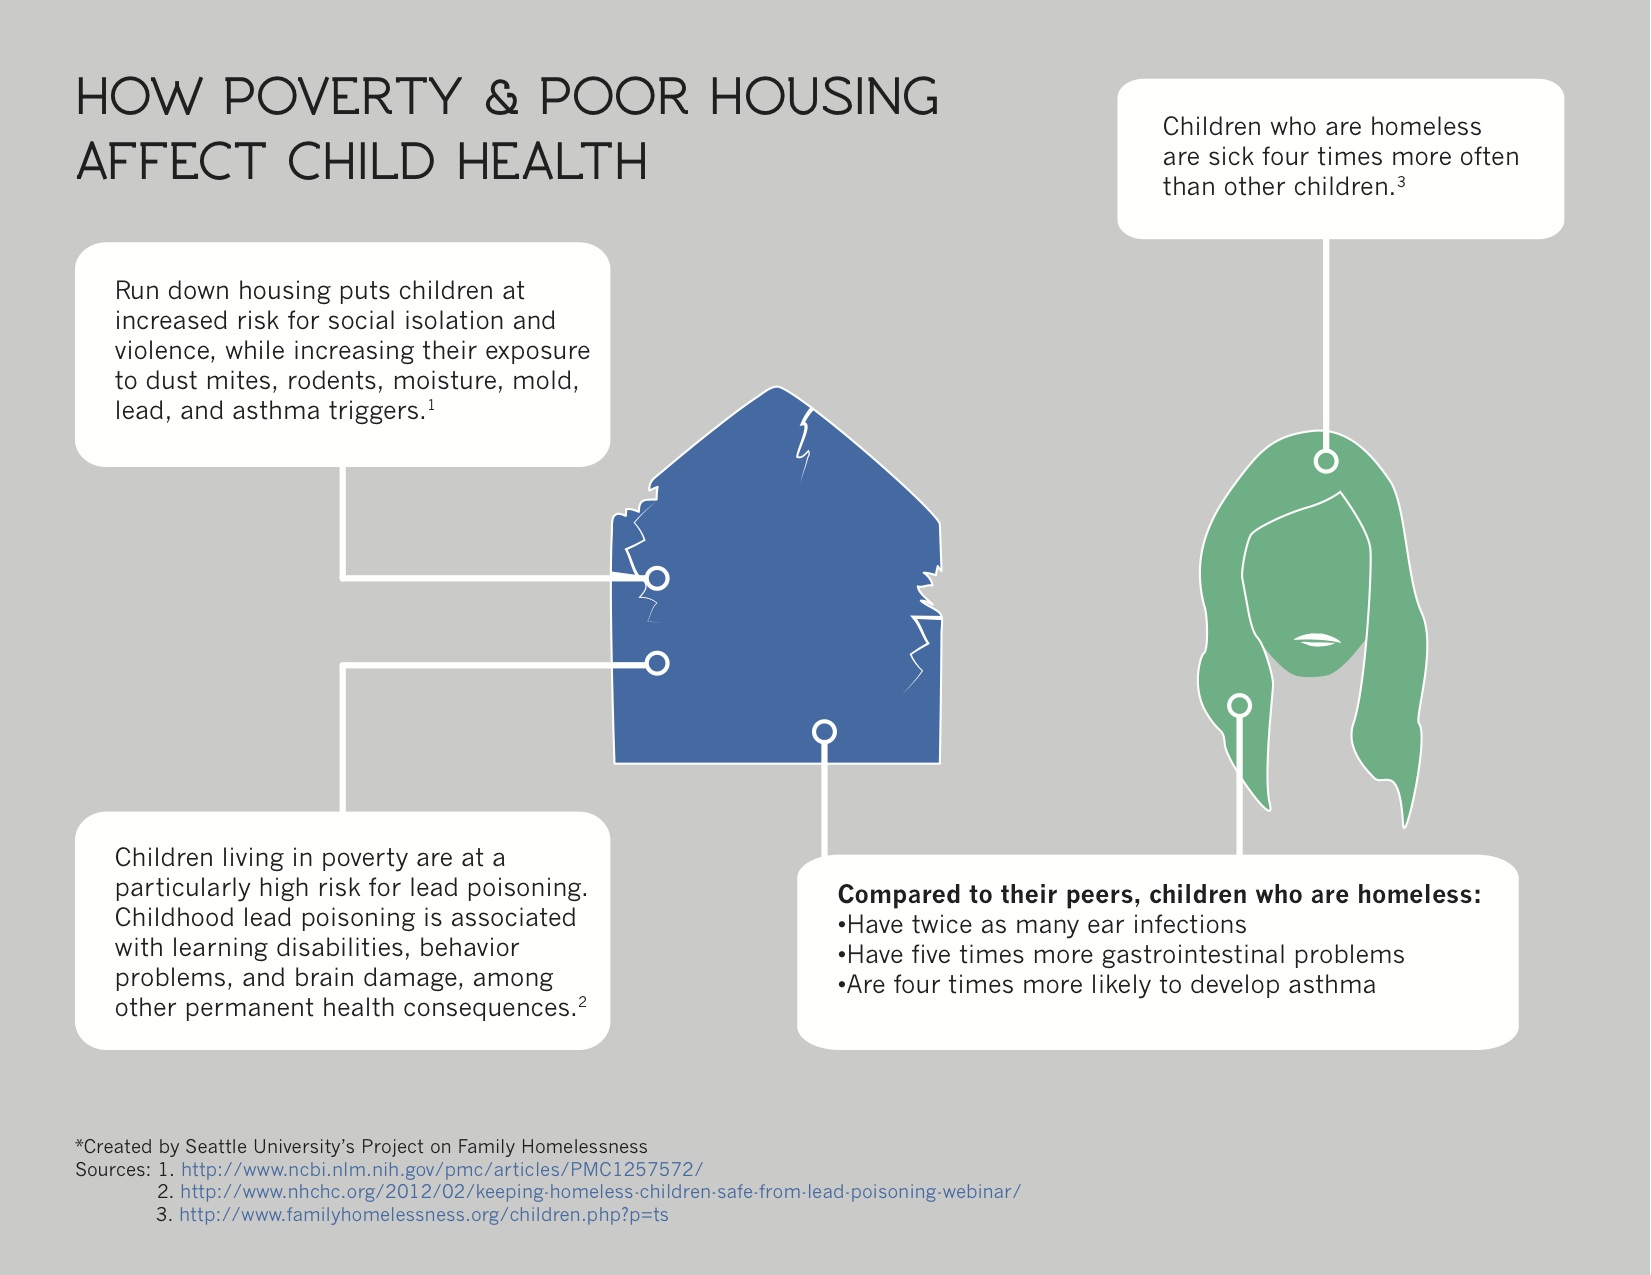 How Poverty and Poor Housing affect Child Health